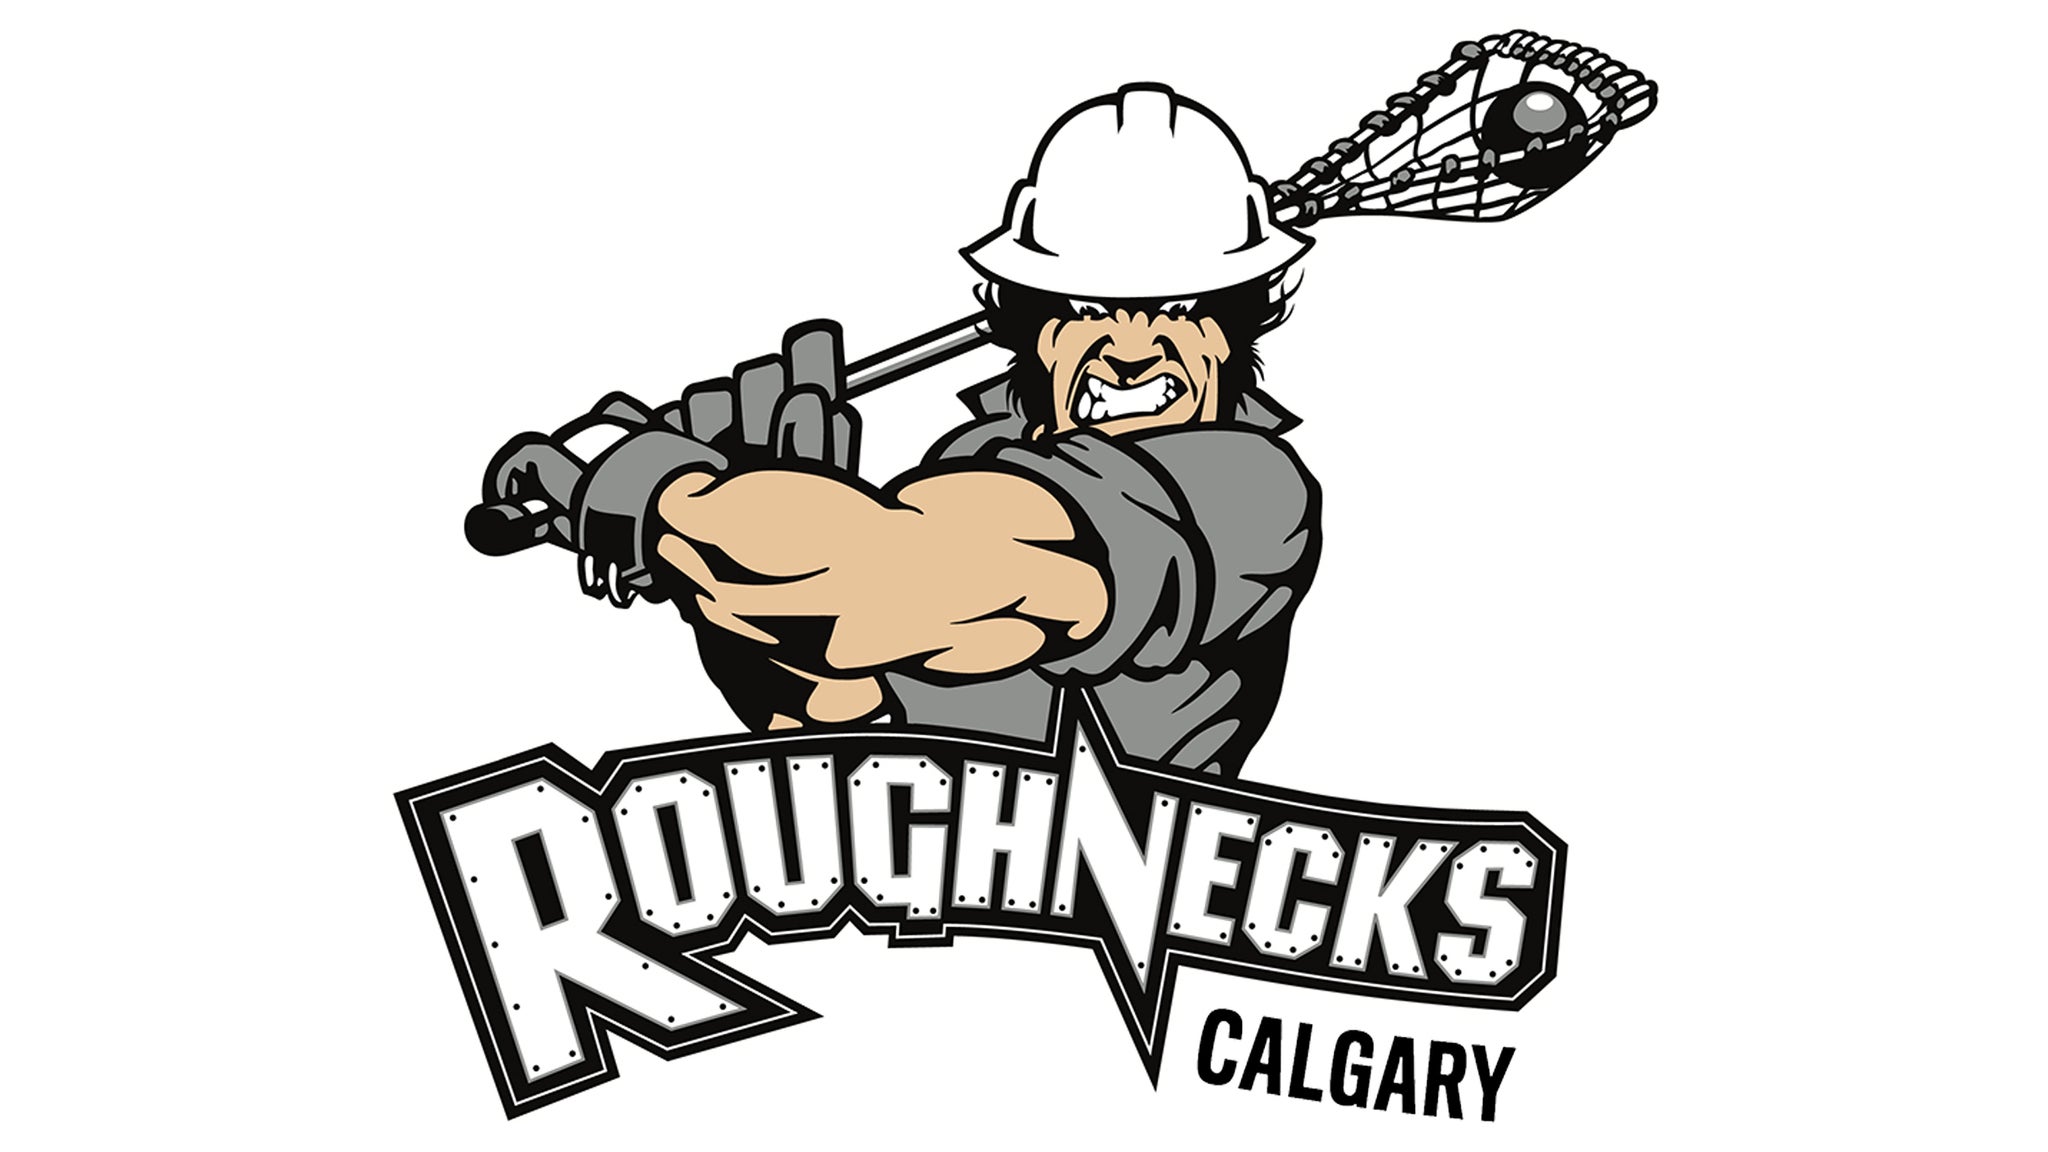 Calgary Roughnecks vs. Panther City Lacrosse Club in Calgary promo photo for Classroom Initiative presale offer code